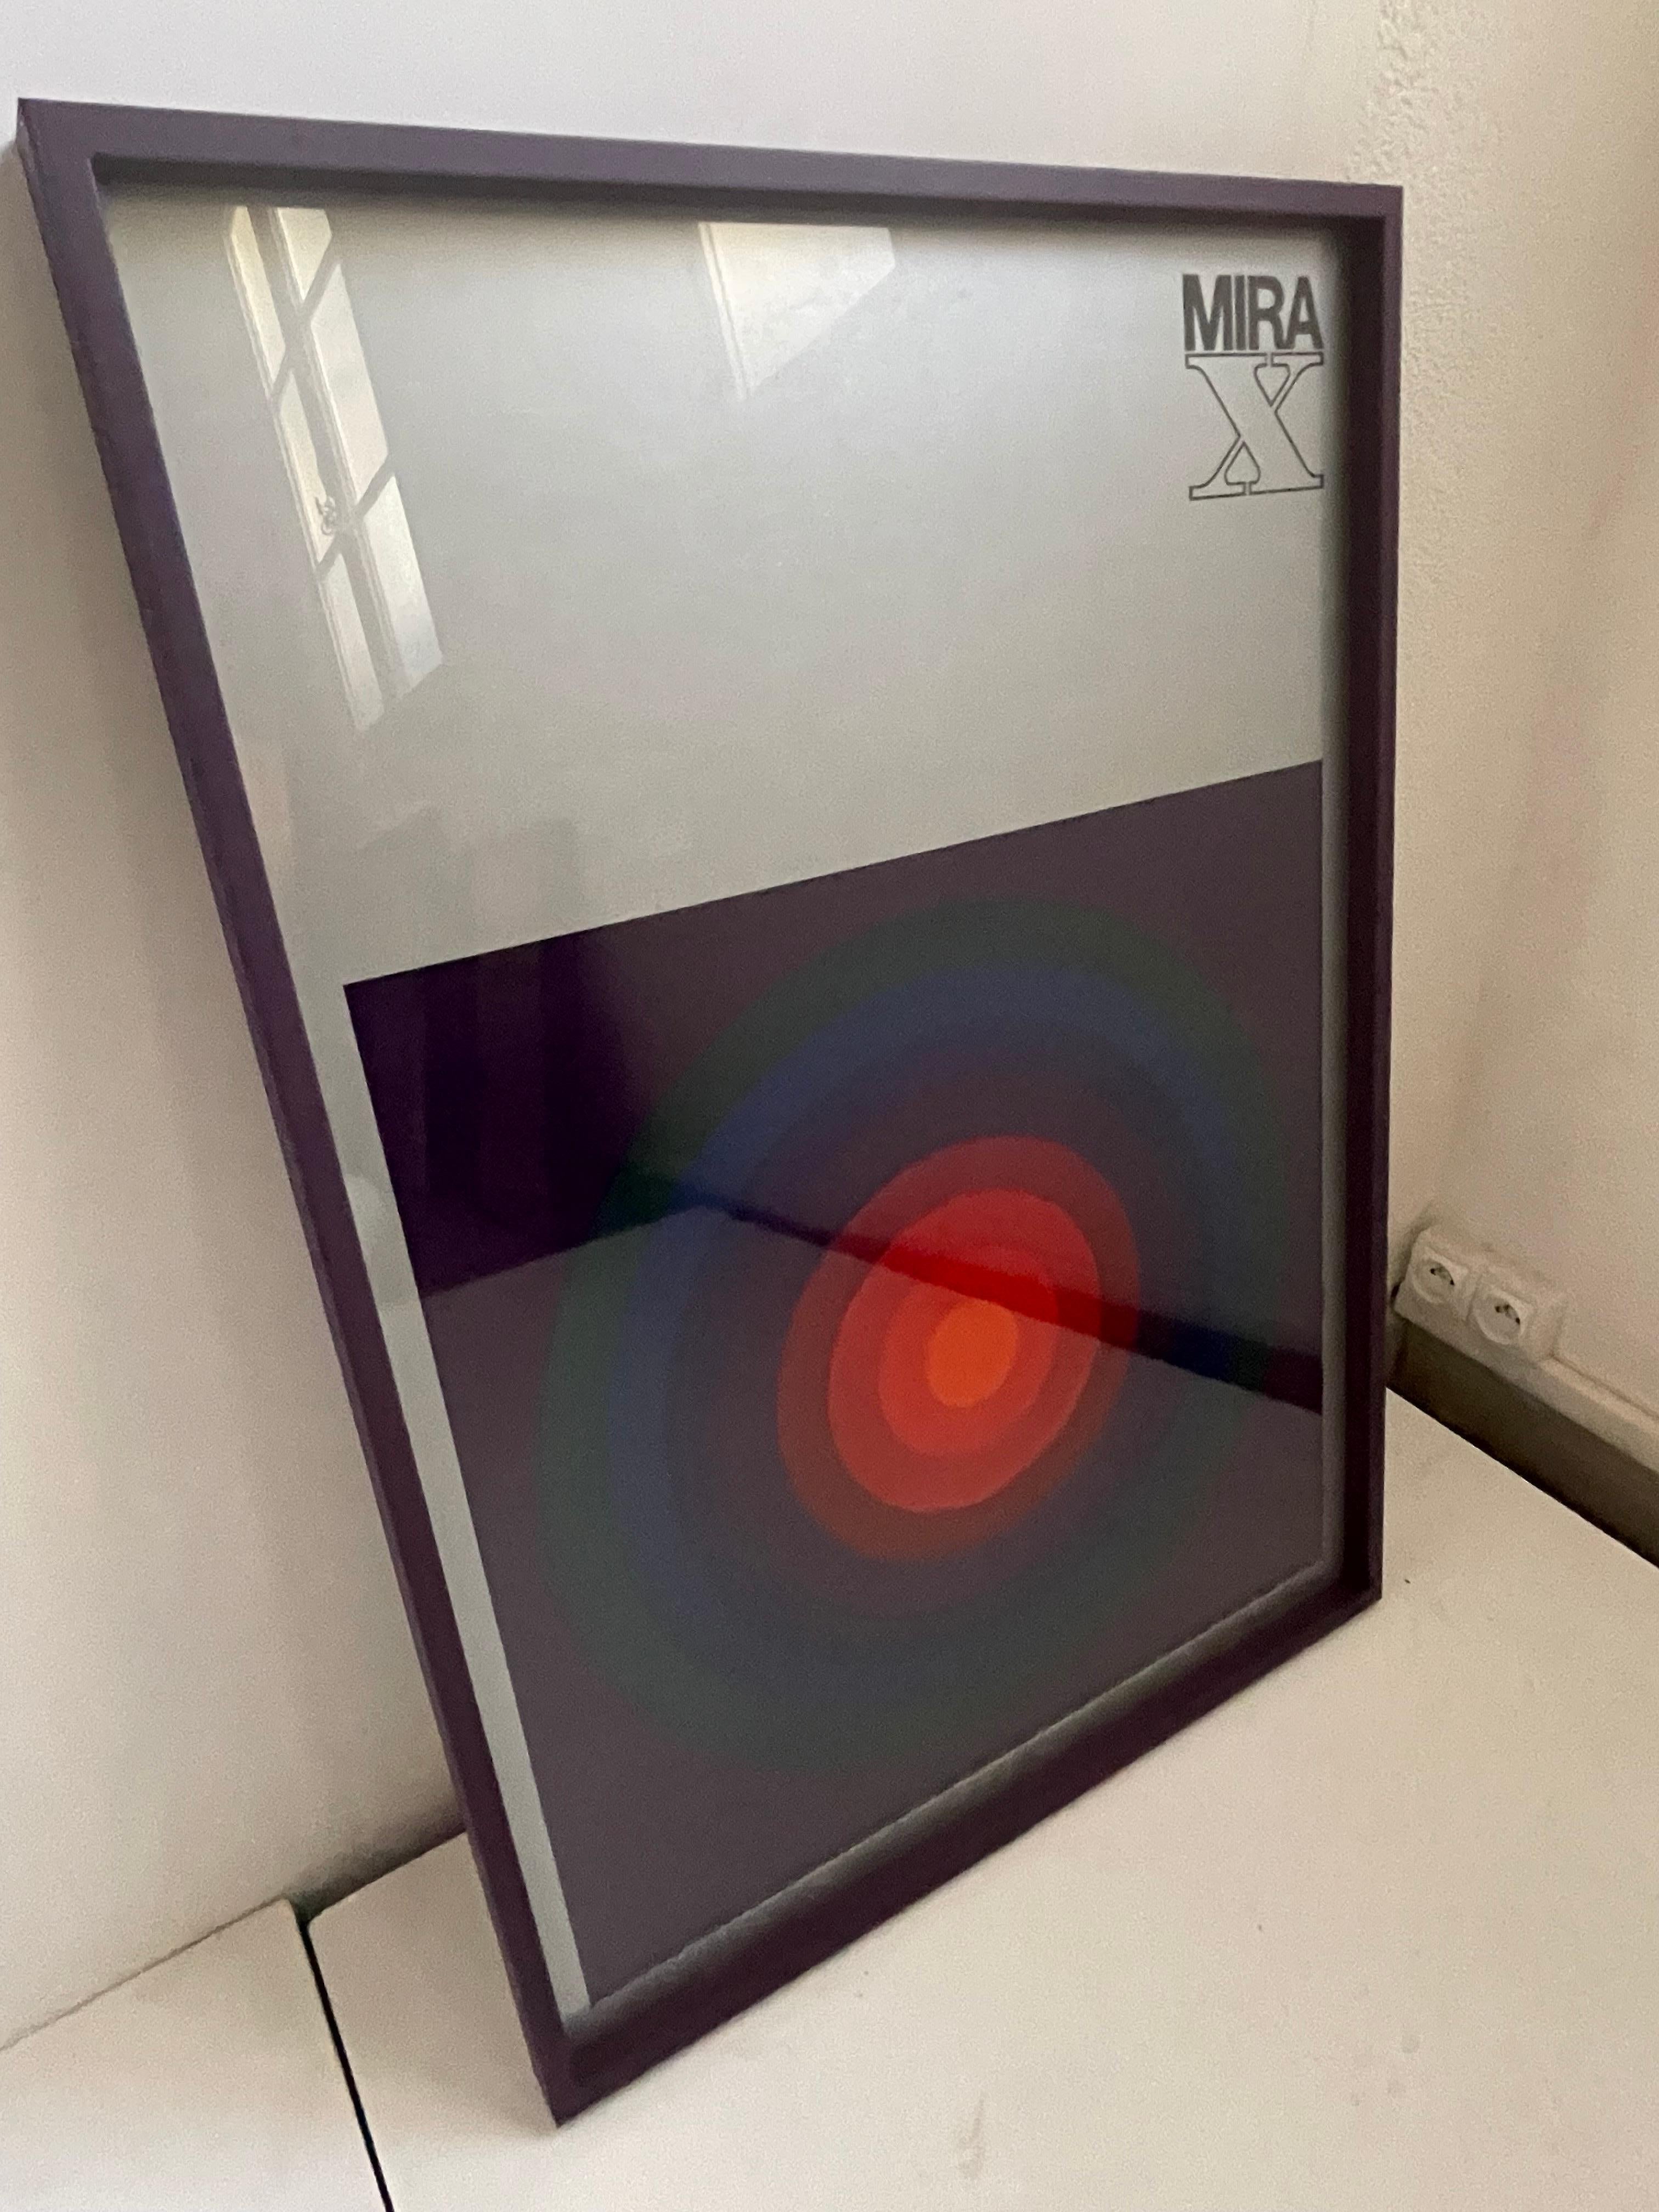 Very rare poster advert for textile Mira-X designed by Verner Panton
60 x 90 cm - silver paper 
With frame (Purple)
Part serie of 5 units differents, see other announcements or complete set.
      